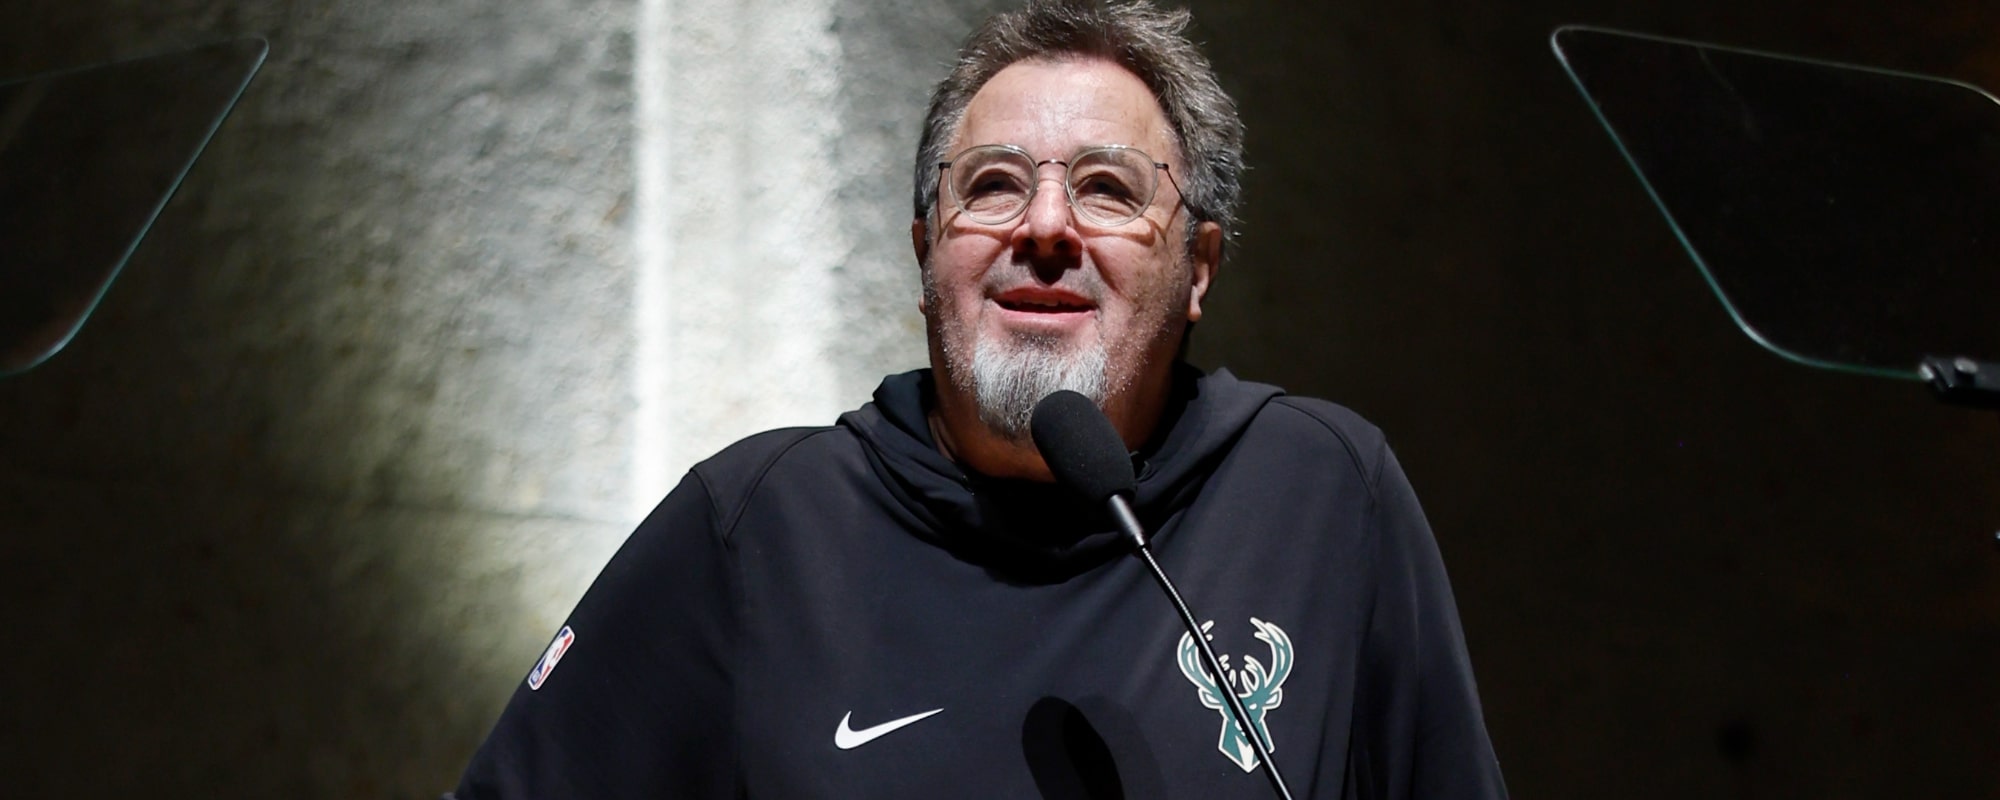 Vince Gill Reveals What He Plans to Do After The Eagles Disband